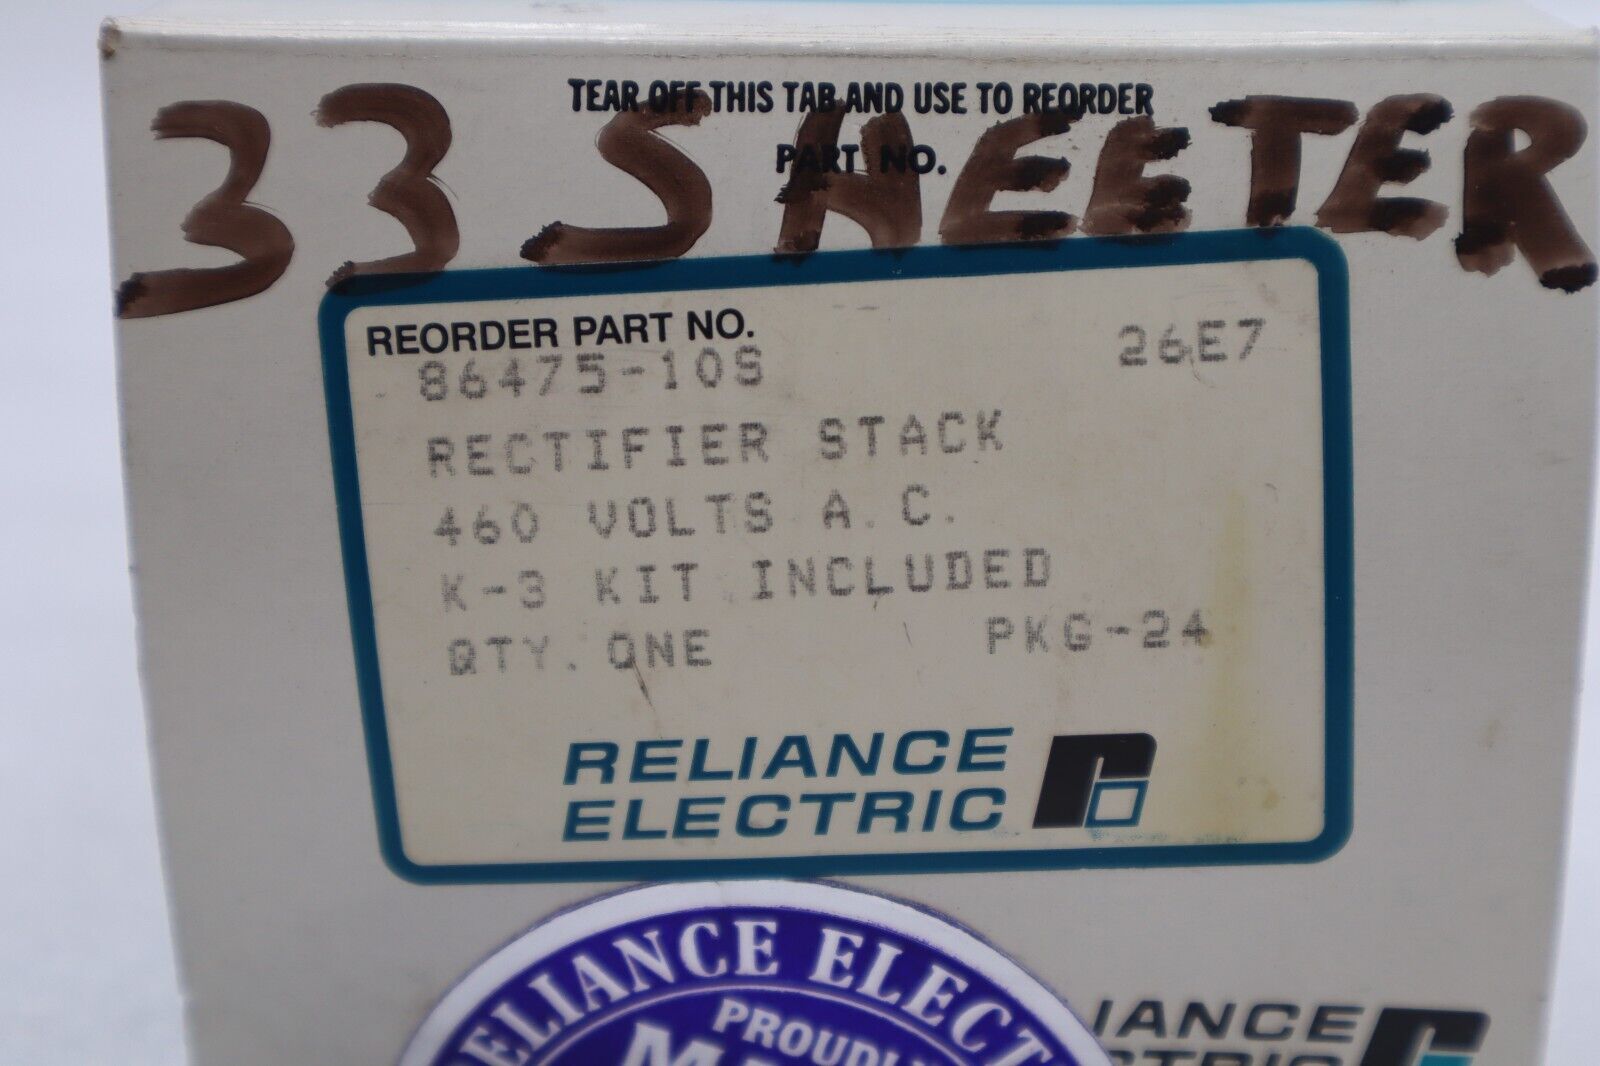 Reliance 86475-10S New Rectifier Stack 460 Volts AC NEW STOCK K-2812